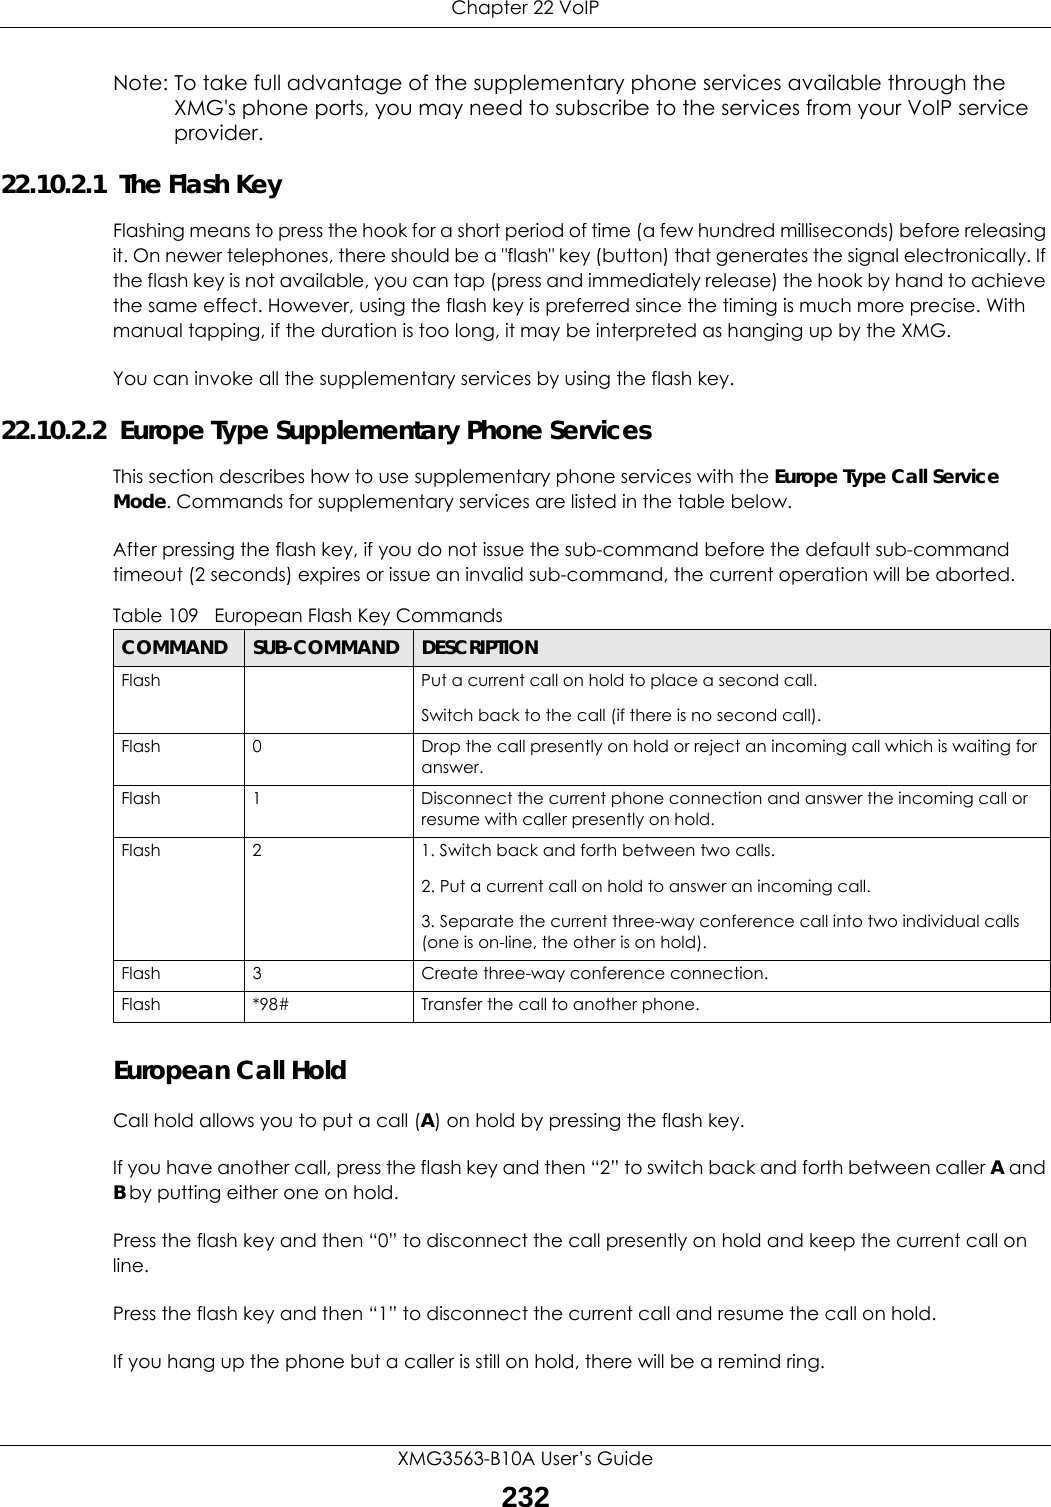 Chapter 22 VoIPXMG3563-B10A User’s Guide232Note: To take full advantage of the supplementary phone services available through the XMG&apos;s phone ports, you may need to subscribe to the services from your VoIP service provider.22.10.2.1  The Flash KeyFlashing means to press the hook for a short period of time (a few hundred milliseconds) before releasing it. On newer telephones, there should be a &quot;flash&quot; key (button) that generates the signal electronically. If the flash key is not available, you can tap (press and immediately release) the hook by hand to achieve the same effect. However, using the flash key is preferred since the timing is much more precise. With manual tapping, if the duration is too long, it may be interpreted as hanging up by the XMG.You can invoke all the supplementary services by using the flash key. 22.10.2.2  Europe Type Supplementary Phone ServicesThis section describes how to use supplementary phone services with the Europe Type Call Service Mode. Commands for supplementary services are listed in the table below.After pressing the flash key, if you do not issue the sub-command before the default sub-command timeout (2 seconds) expires or issue an invalid sub-command, the current operation will be aborted.European Call HoldCall hold allows you to put a call (A) on hold by pressing the flash key. If you have another call, press the flash key and then “2” to switch back and forth between caller A and B by putting either one on hold.Press the flash key and then “0” to disconnect the call presently on hold and keep the current call on line.Press the flash key and then “1” to disconnect the current call and resume the call on hold.If you hang up the phone but a caller is still on hold, there will be a remind ring.Table 109   European Flash Key CommandsCOMMAND SUB-COMMAND DESCRIPTIONFlash  Put a current call on hold to place a second call.Switch back to the call (if there is no second call).Flash 0 Drop the call presently on hold or reject an incoming call which is waiting for answer.Flash 1 Disconnect the current phone connection and answer the incoming call or resume with caller presently on hold.Flash 2 1. Switch back and forth between two calls.2. Put a current call on hold to answer an incoming call.3. Separate the current three-way conference call into two individual calls (one is on-line, the other is on hold).Flash 3 Create three-way conference connection.Flash  *98# Transfer the call to another phone.